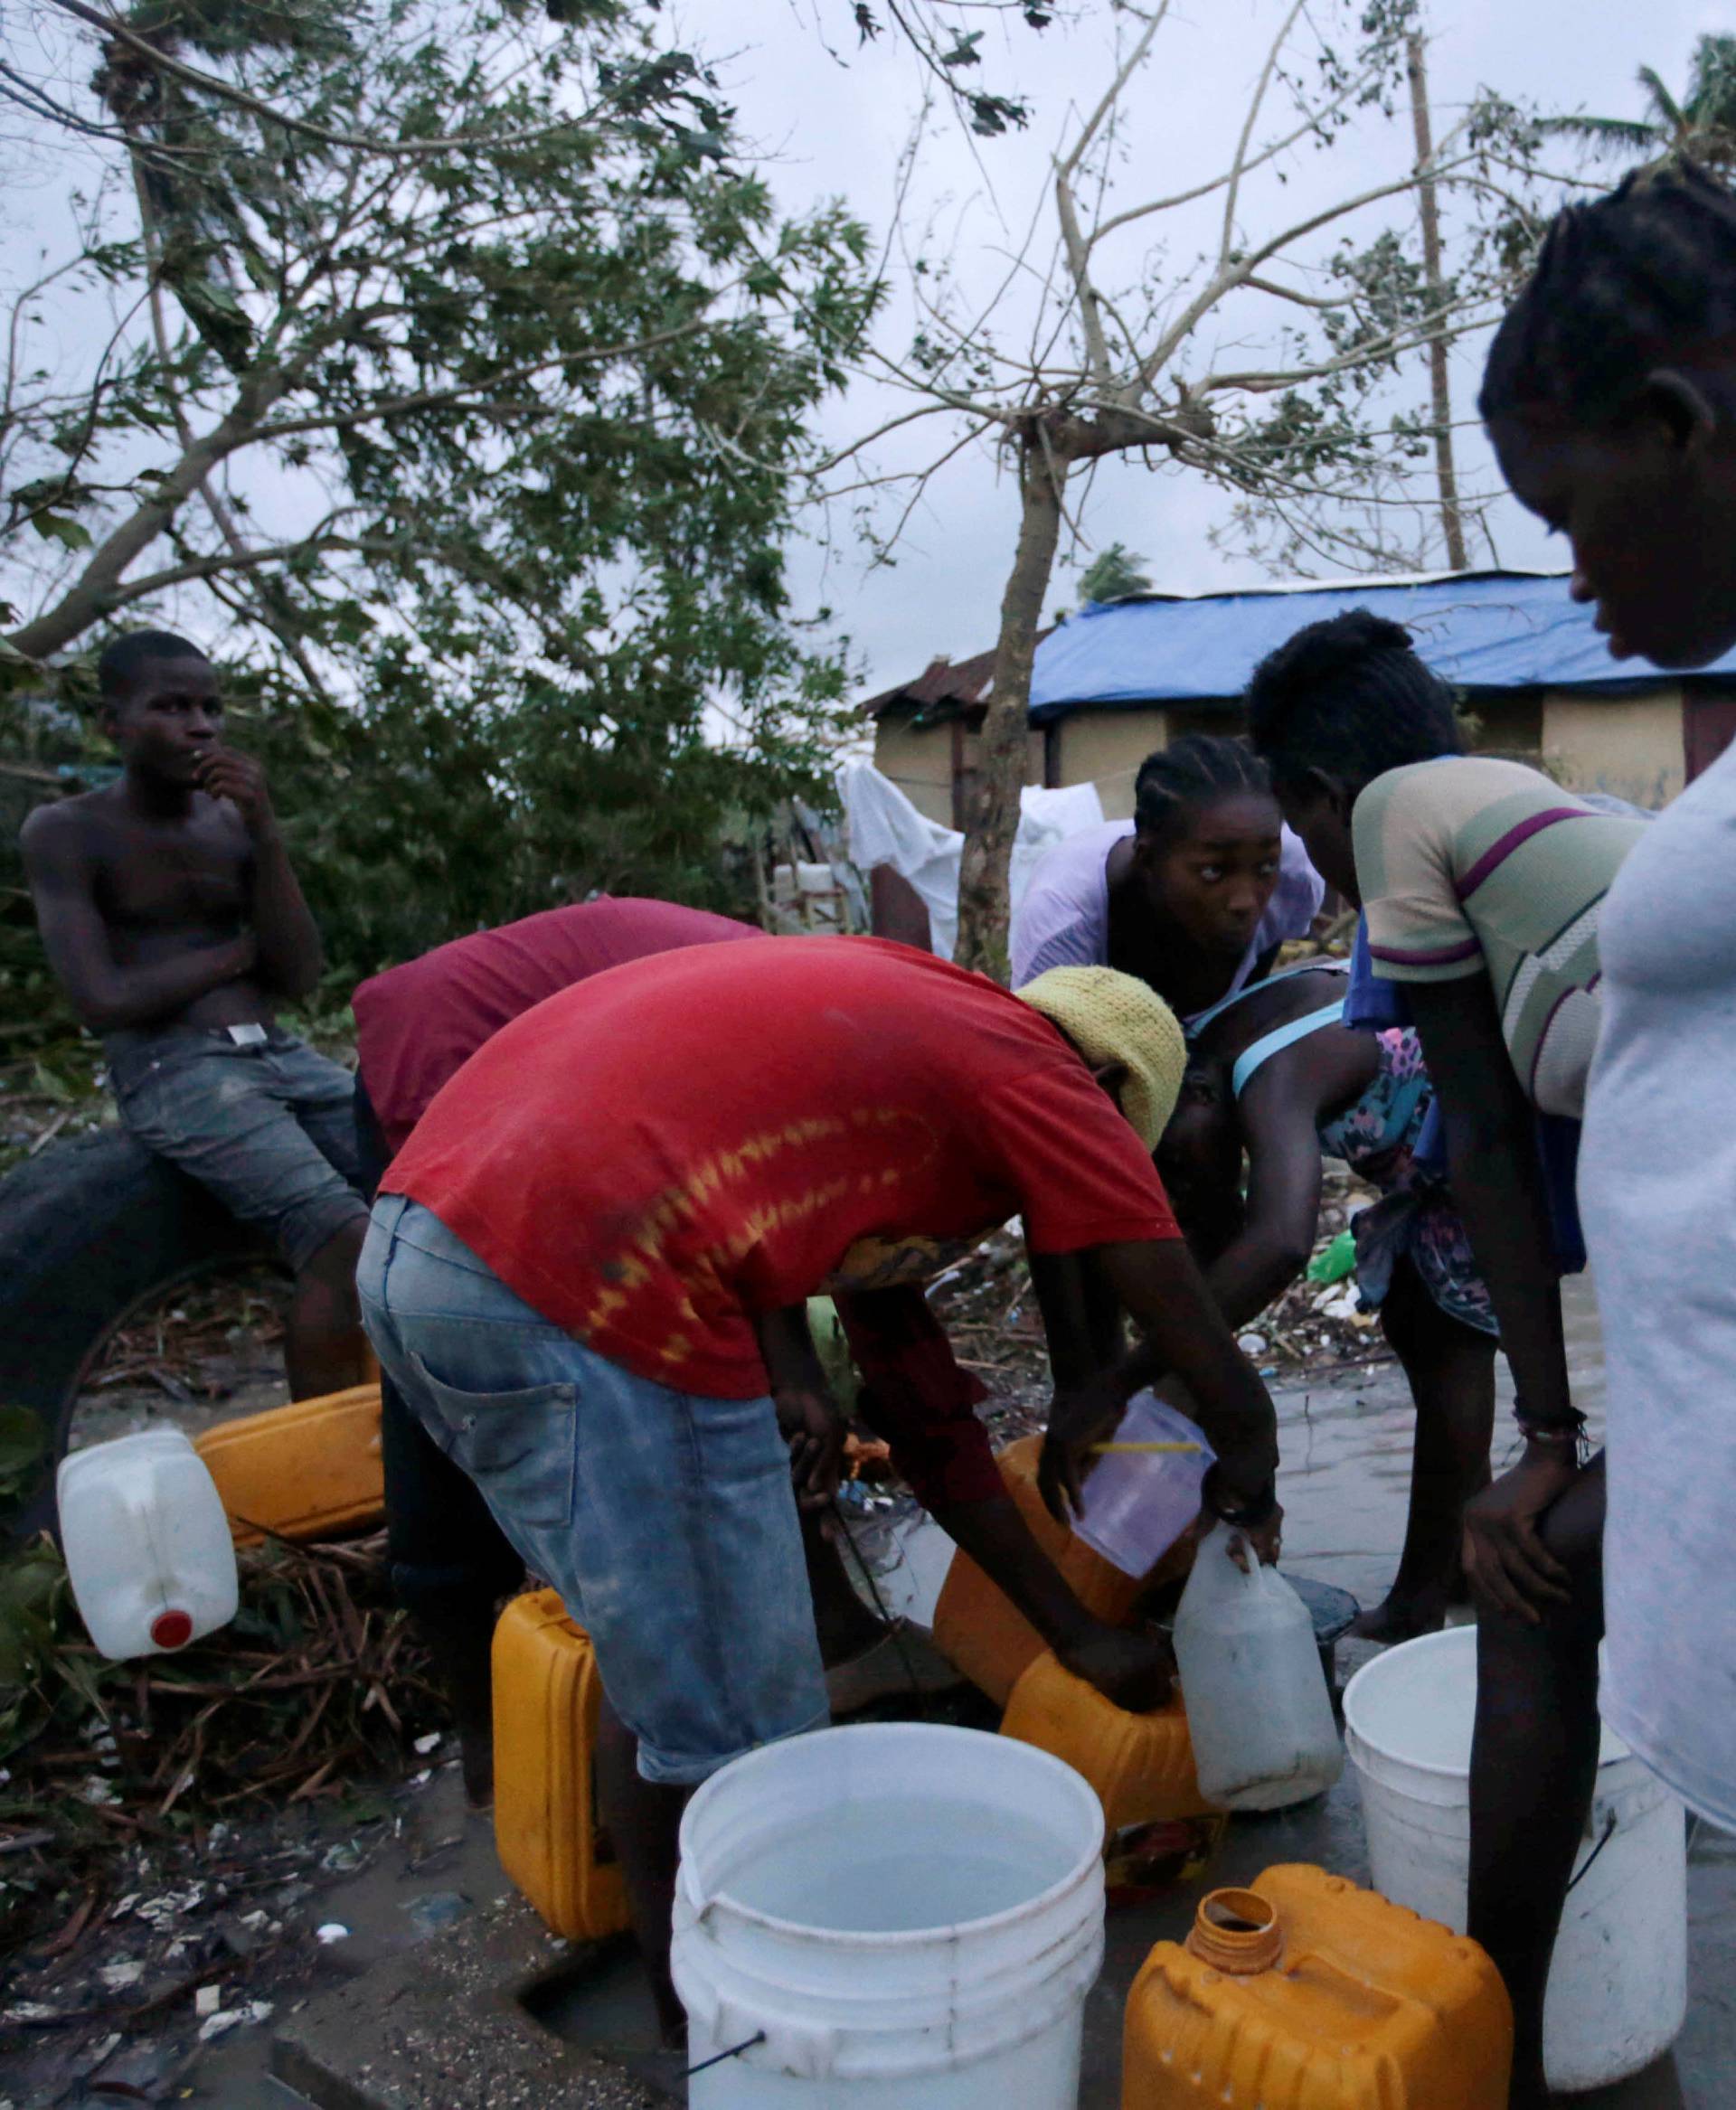 Residents collect water after Hurricane Matthew in Les Cayes